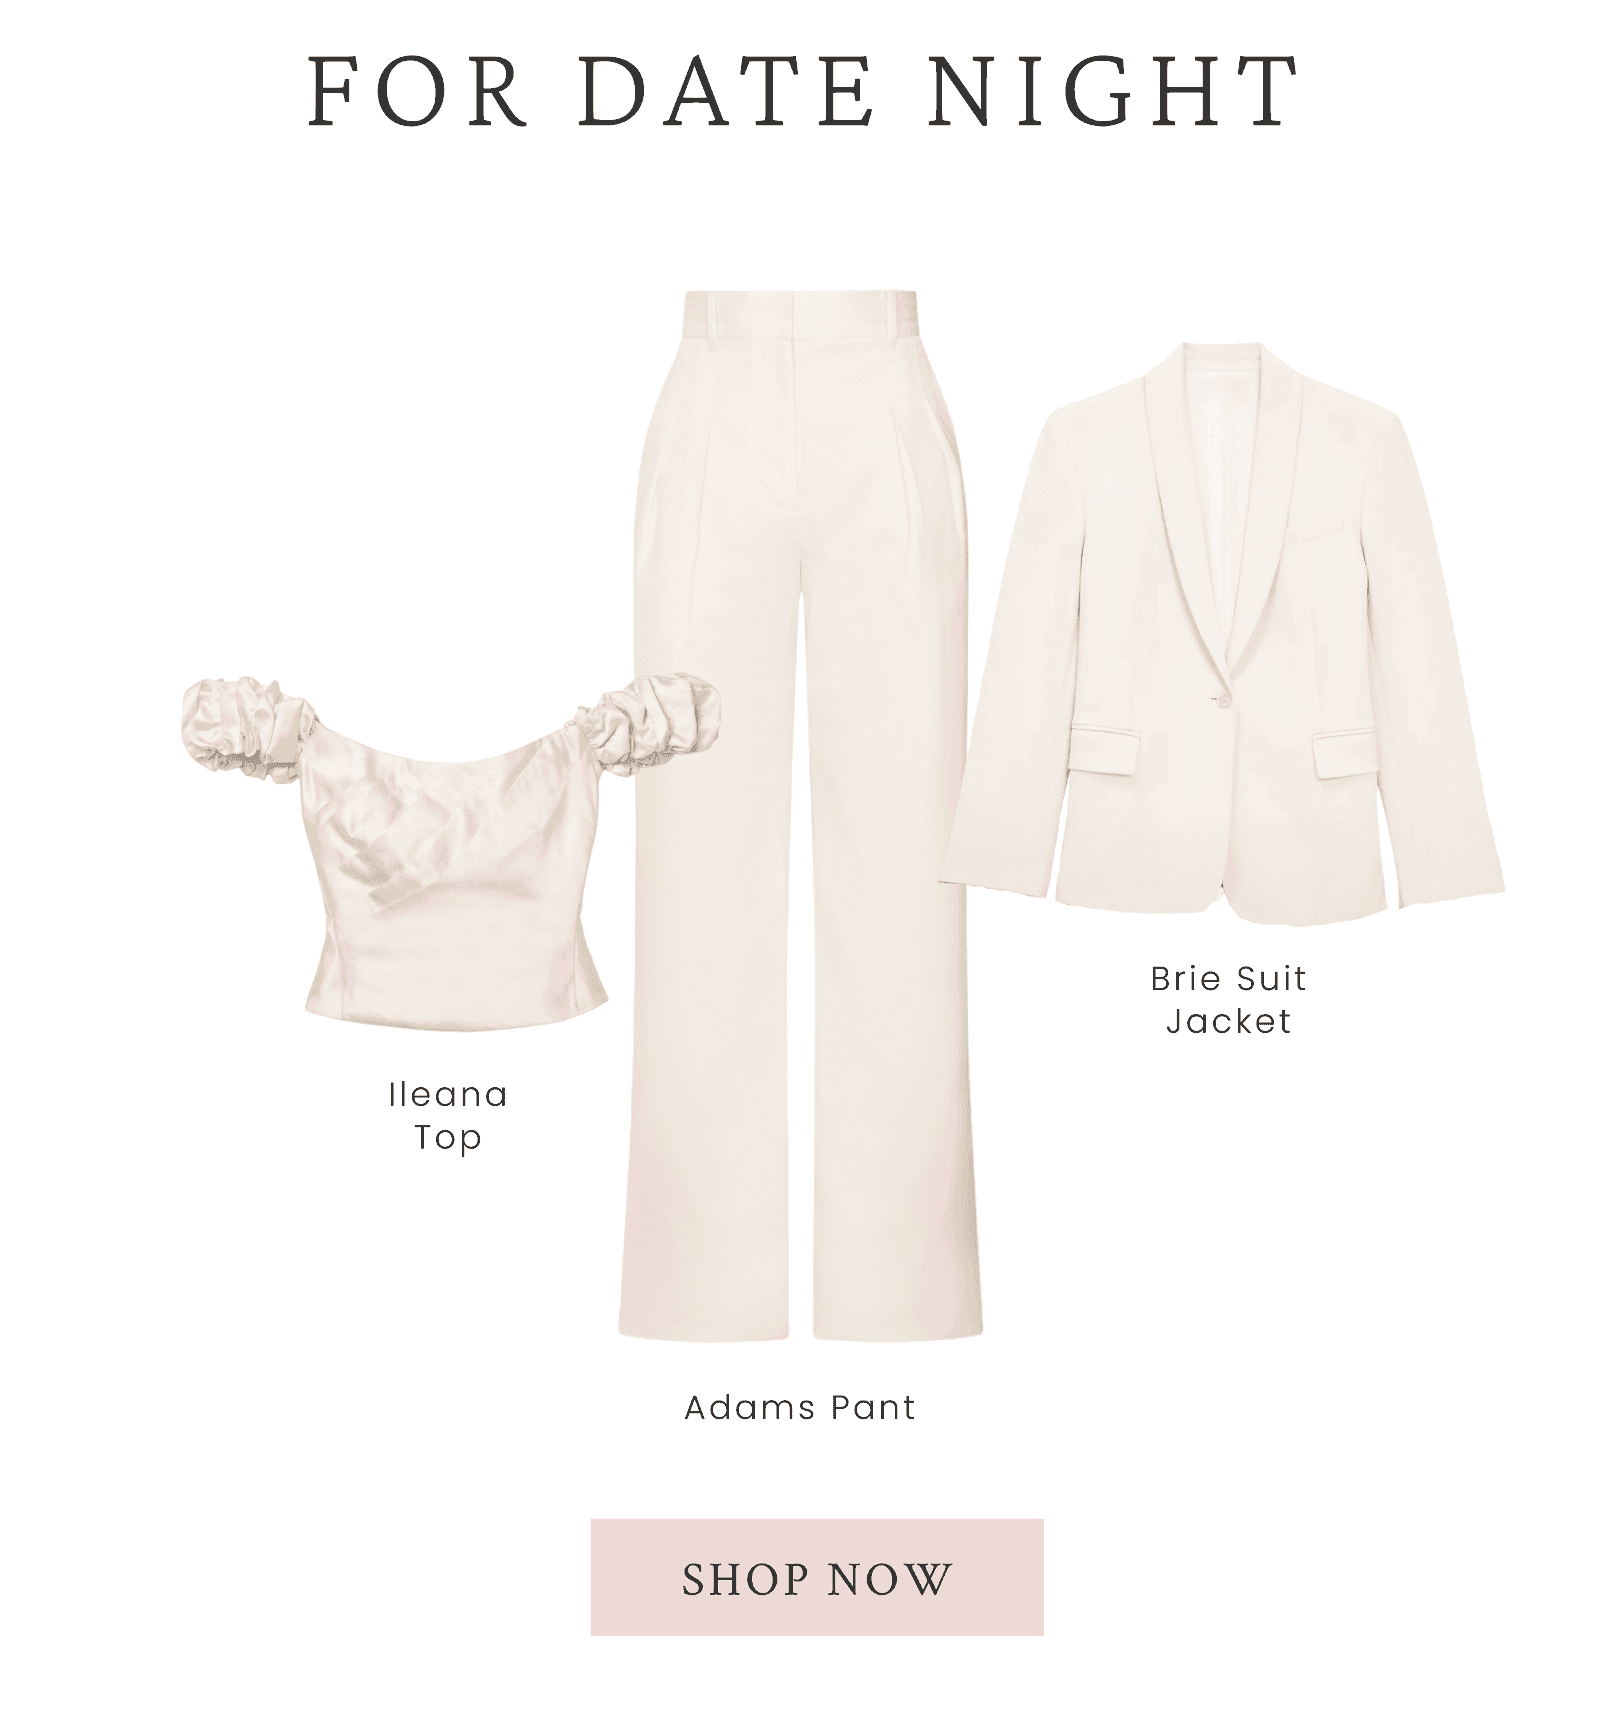 For date night